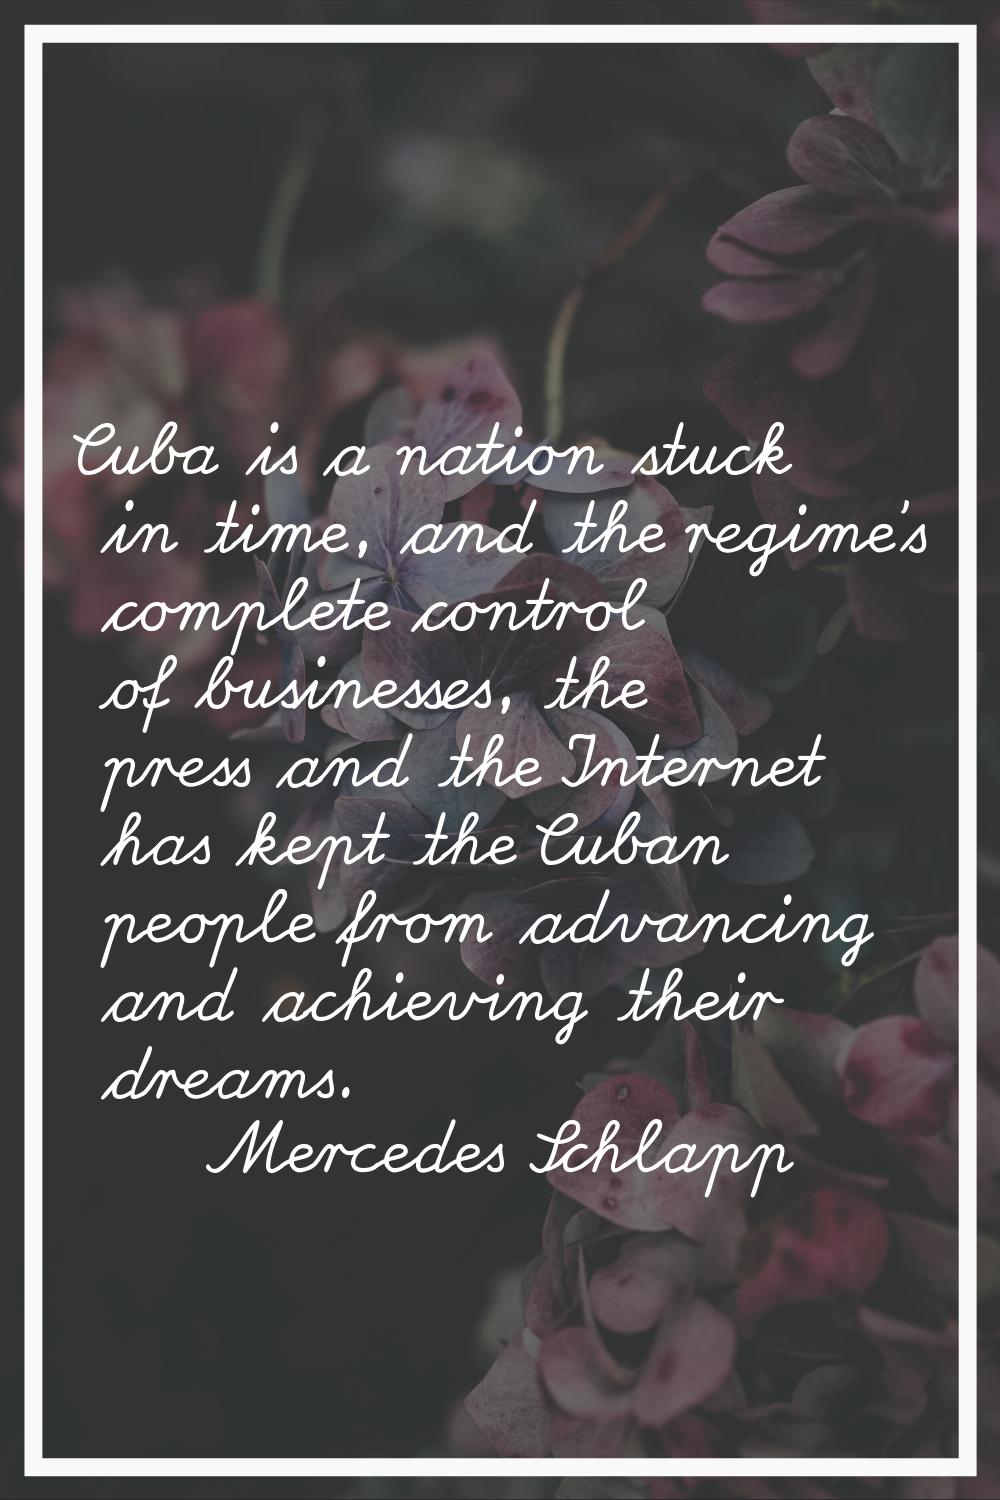 Cuba is a nation stuck in time, and the regime's complete control of businesses, the press and the 